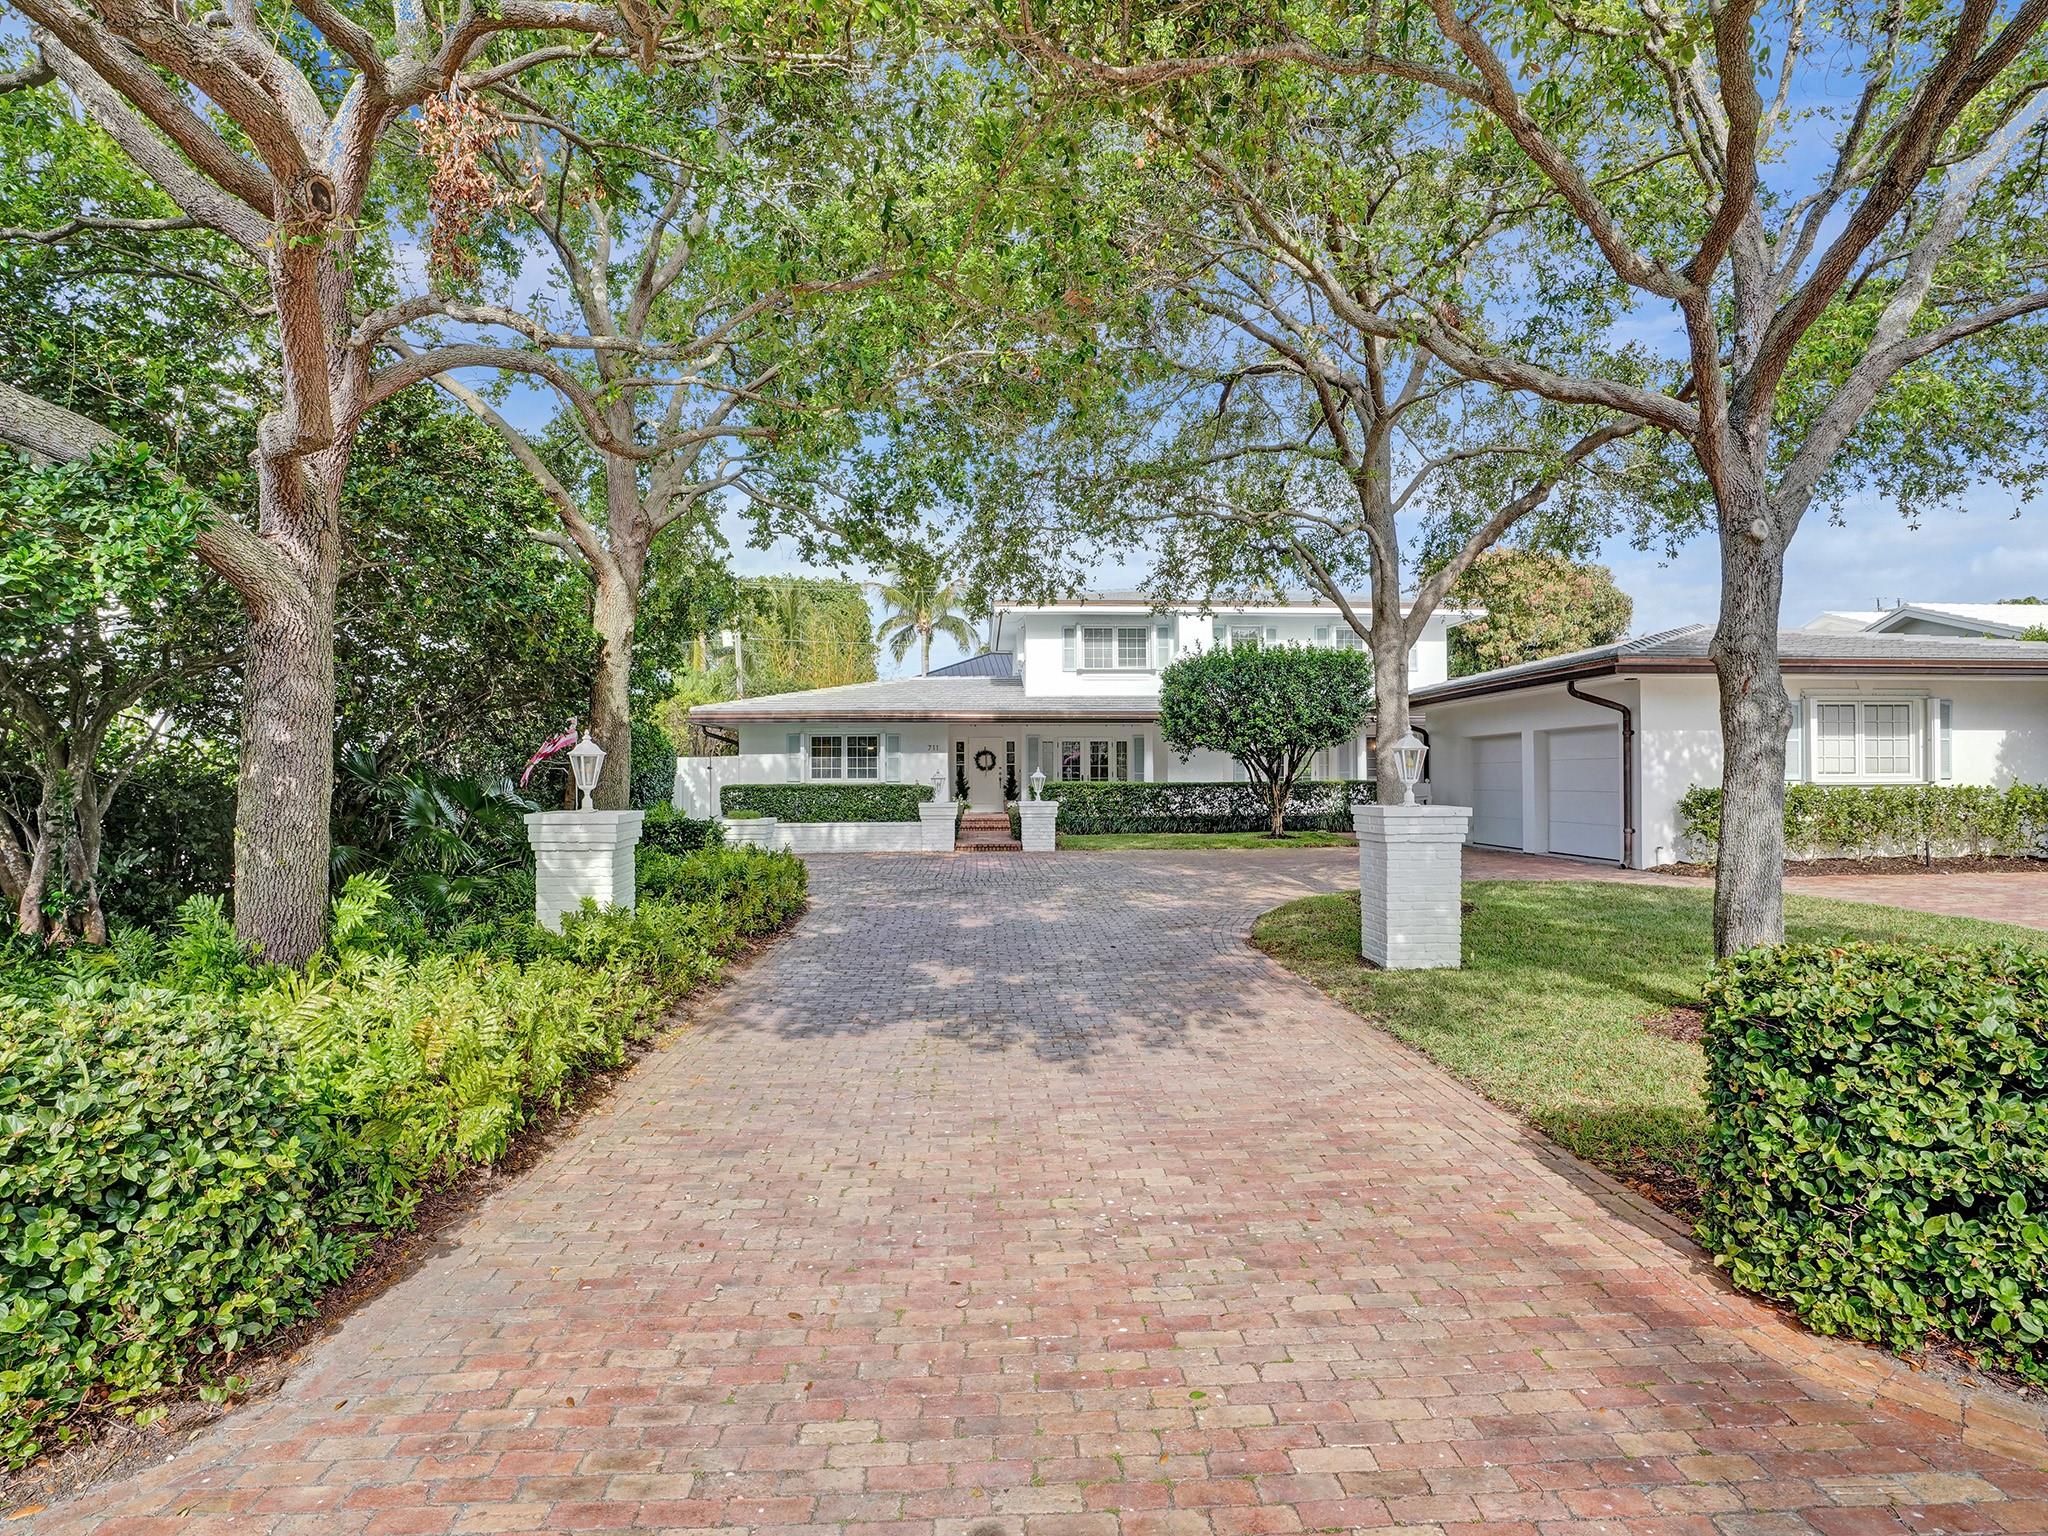 Nestled in the gated community of Sunrise Intracoastal, Fort Lauderdale's hidden gem, this very special home has lovely curb appeal with an Oak-lined Chicago Brick driveway. The light filled interiors exude traditional modern charm with timeless elegance. Completely updated with 2024 (90K) roof with copper gutters and flashing, 3 new (2022) HVAC, kitchen, bathrooms, water heaters, pool equipment and heater, whole house water softener...Turnkey with spacious rooms and a large covered outdoor entertaining area with summer kitchen, gas grill and beverage refrigerator. This coveted and friendly enclave has roving police security and a sub station at the gate. Walk to the beach, Publix, Starbucks, Bayview Elementary, The Galleria Mall. 15 Minutes to Pine Crest School.